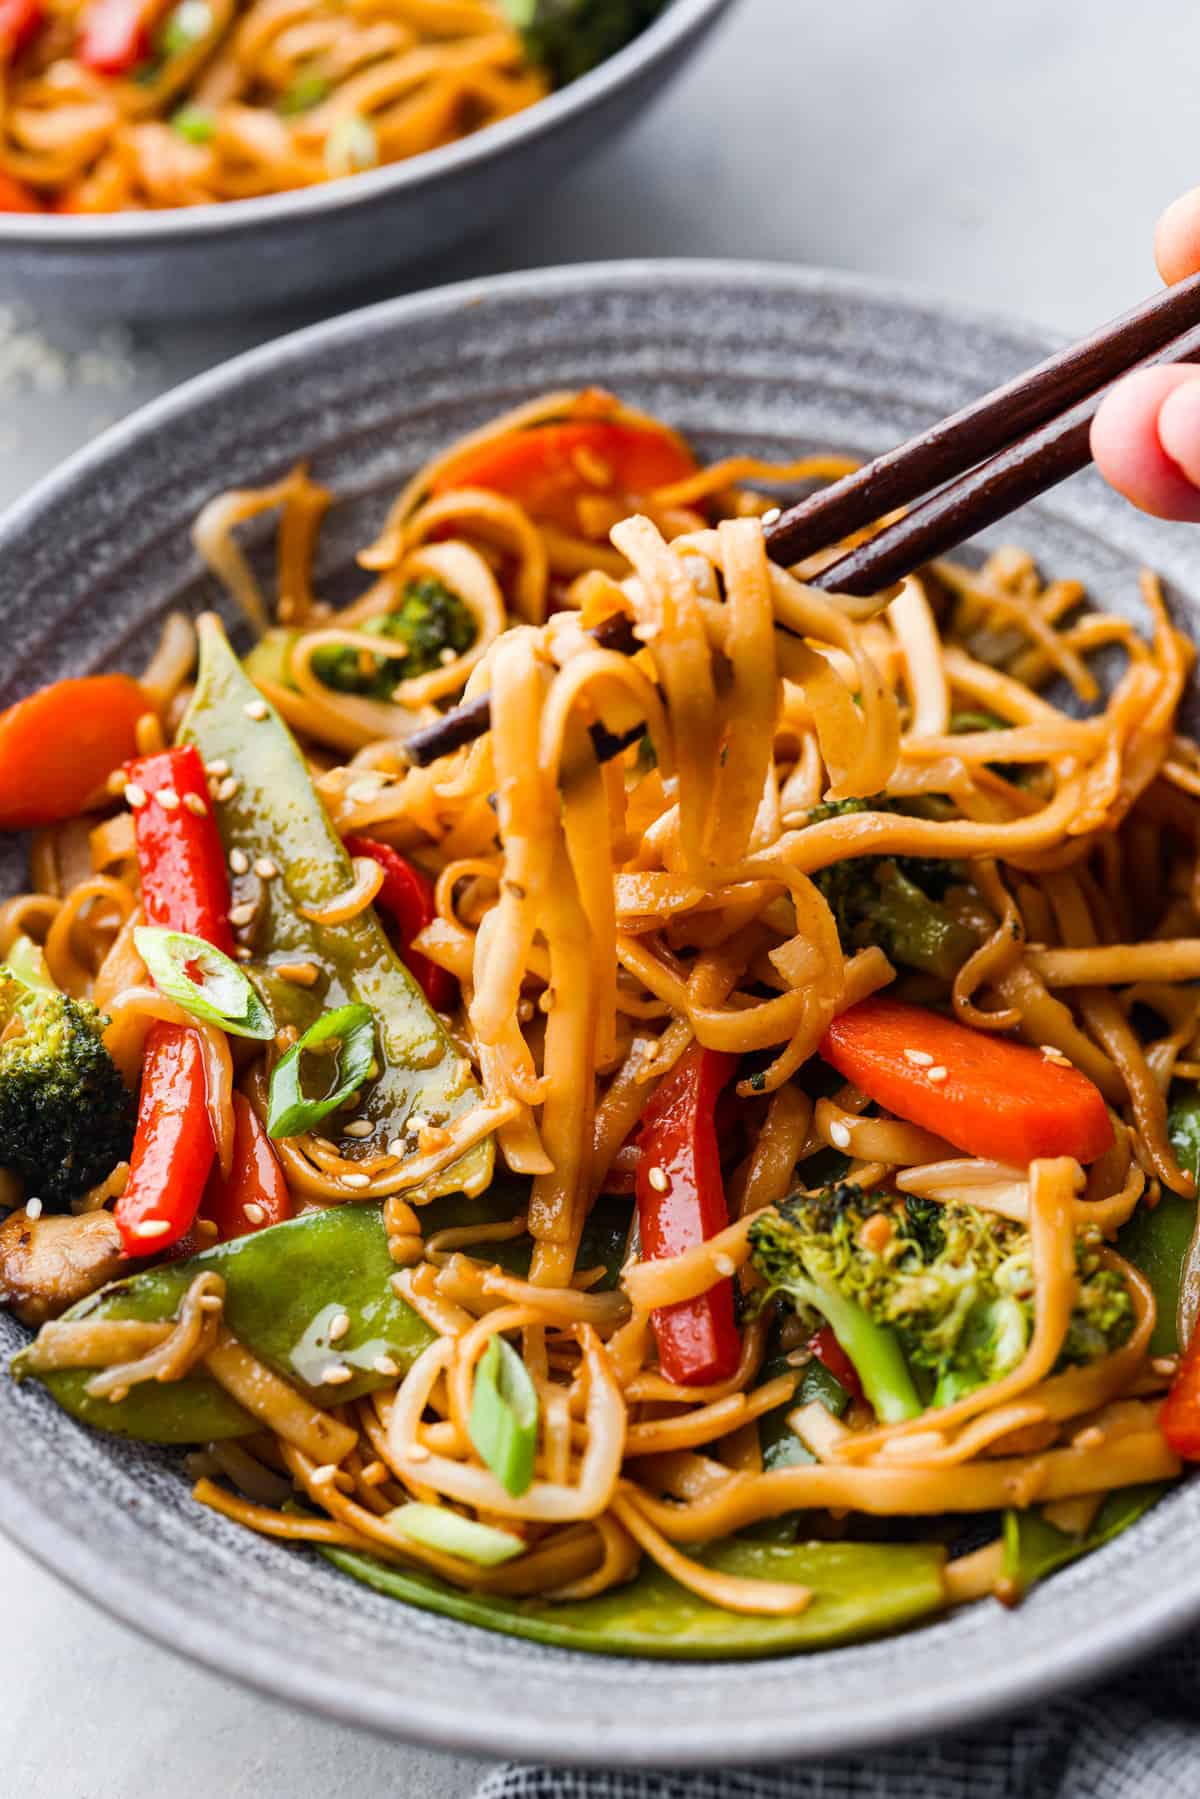 A person uses chopsticks to lift stir-fried noodles and vegetables from a dark ceramic bowl, which includes red peppers, carrots, and broccoli—an easy dinner idea for busy families.